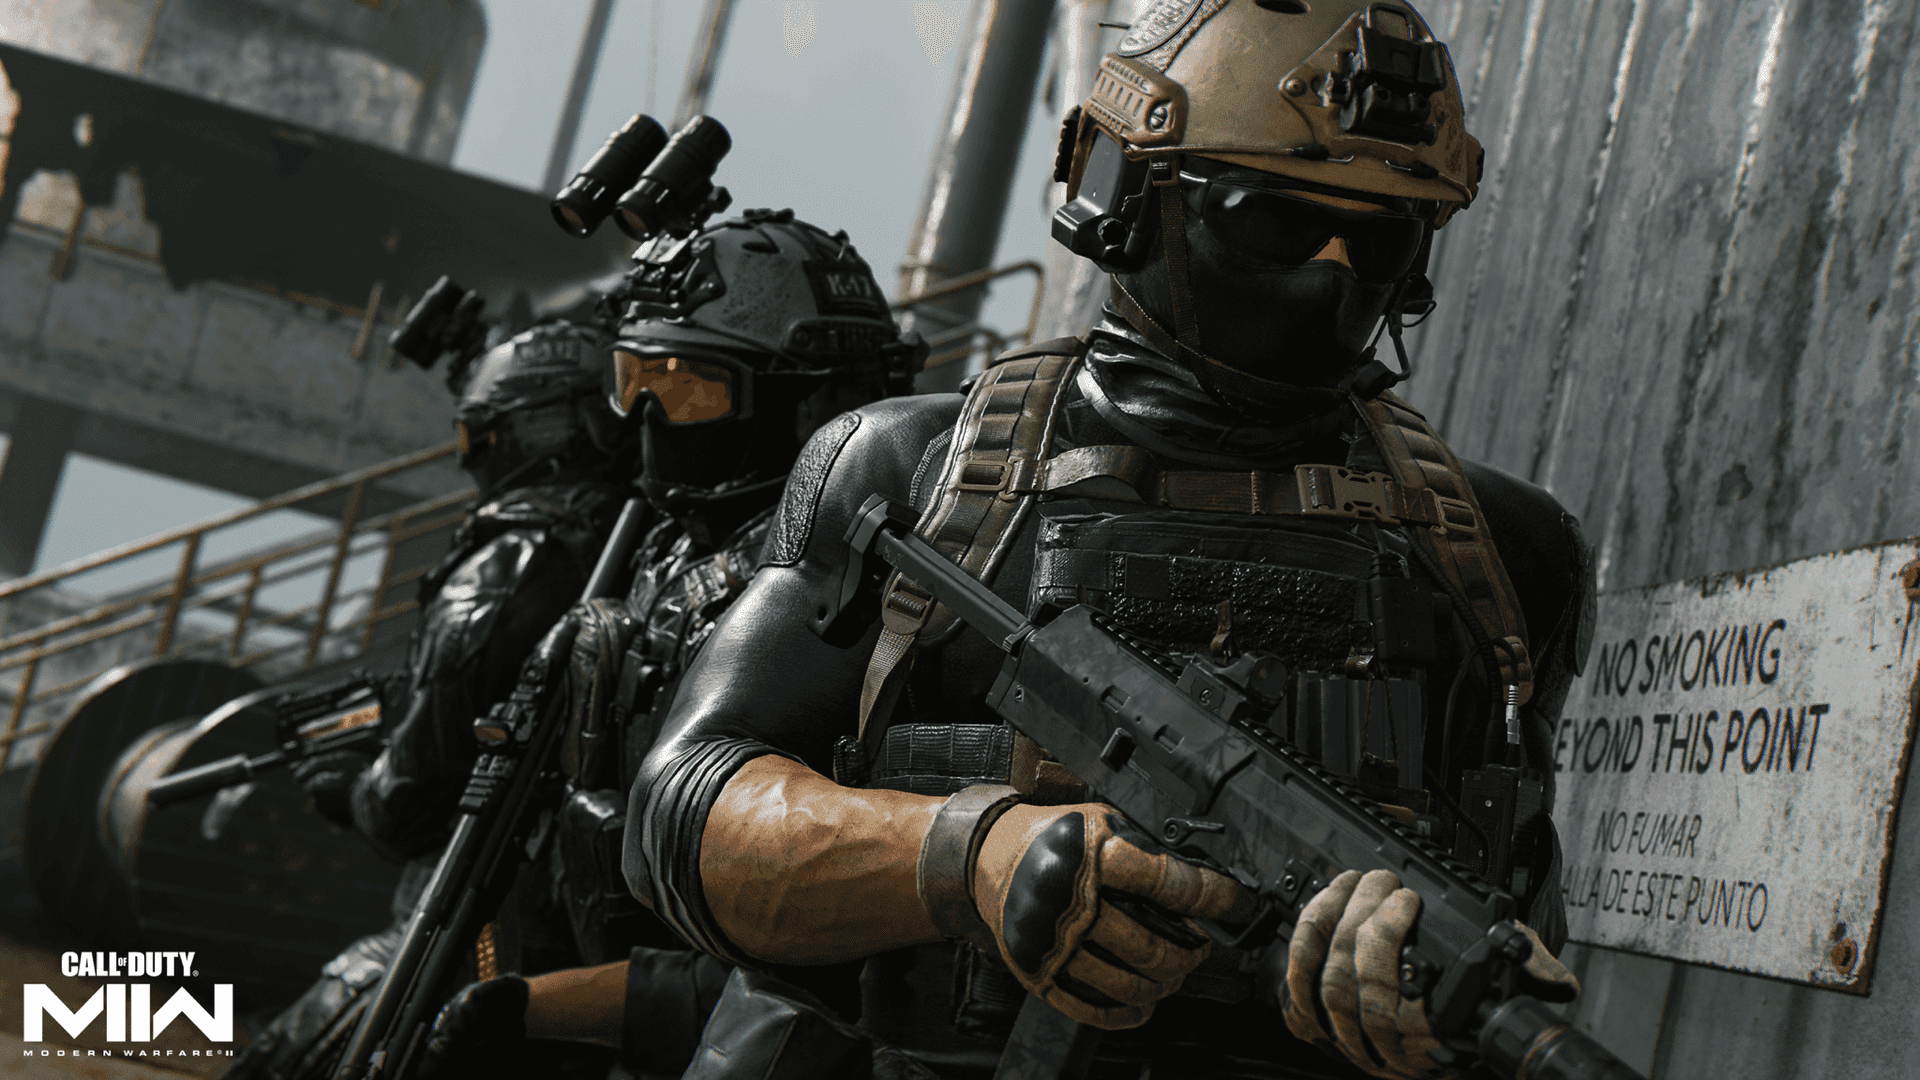 Suit Up for an action-packed gaming experience with Call of Duty